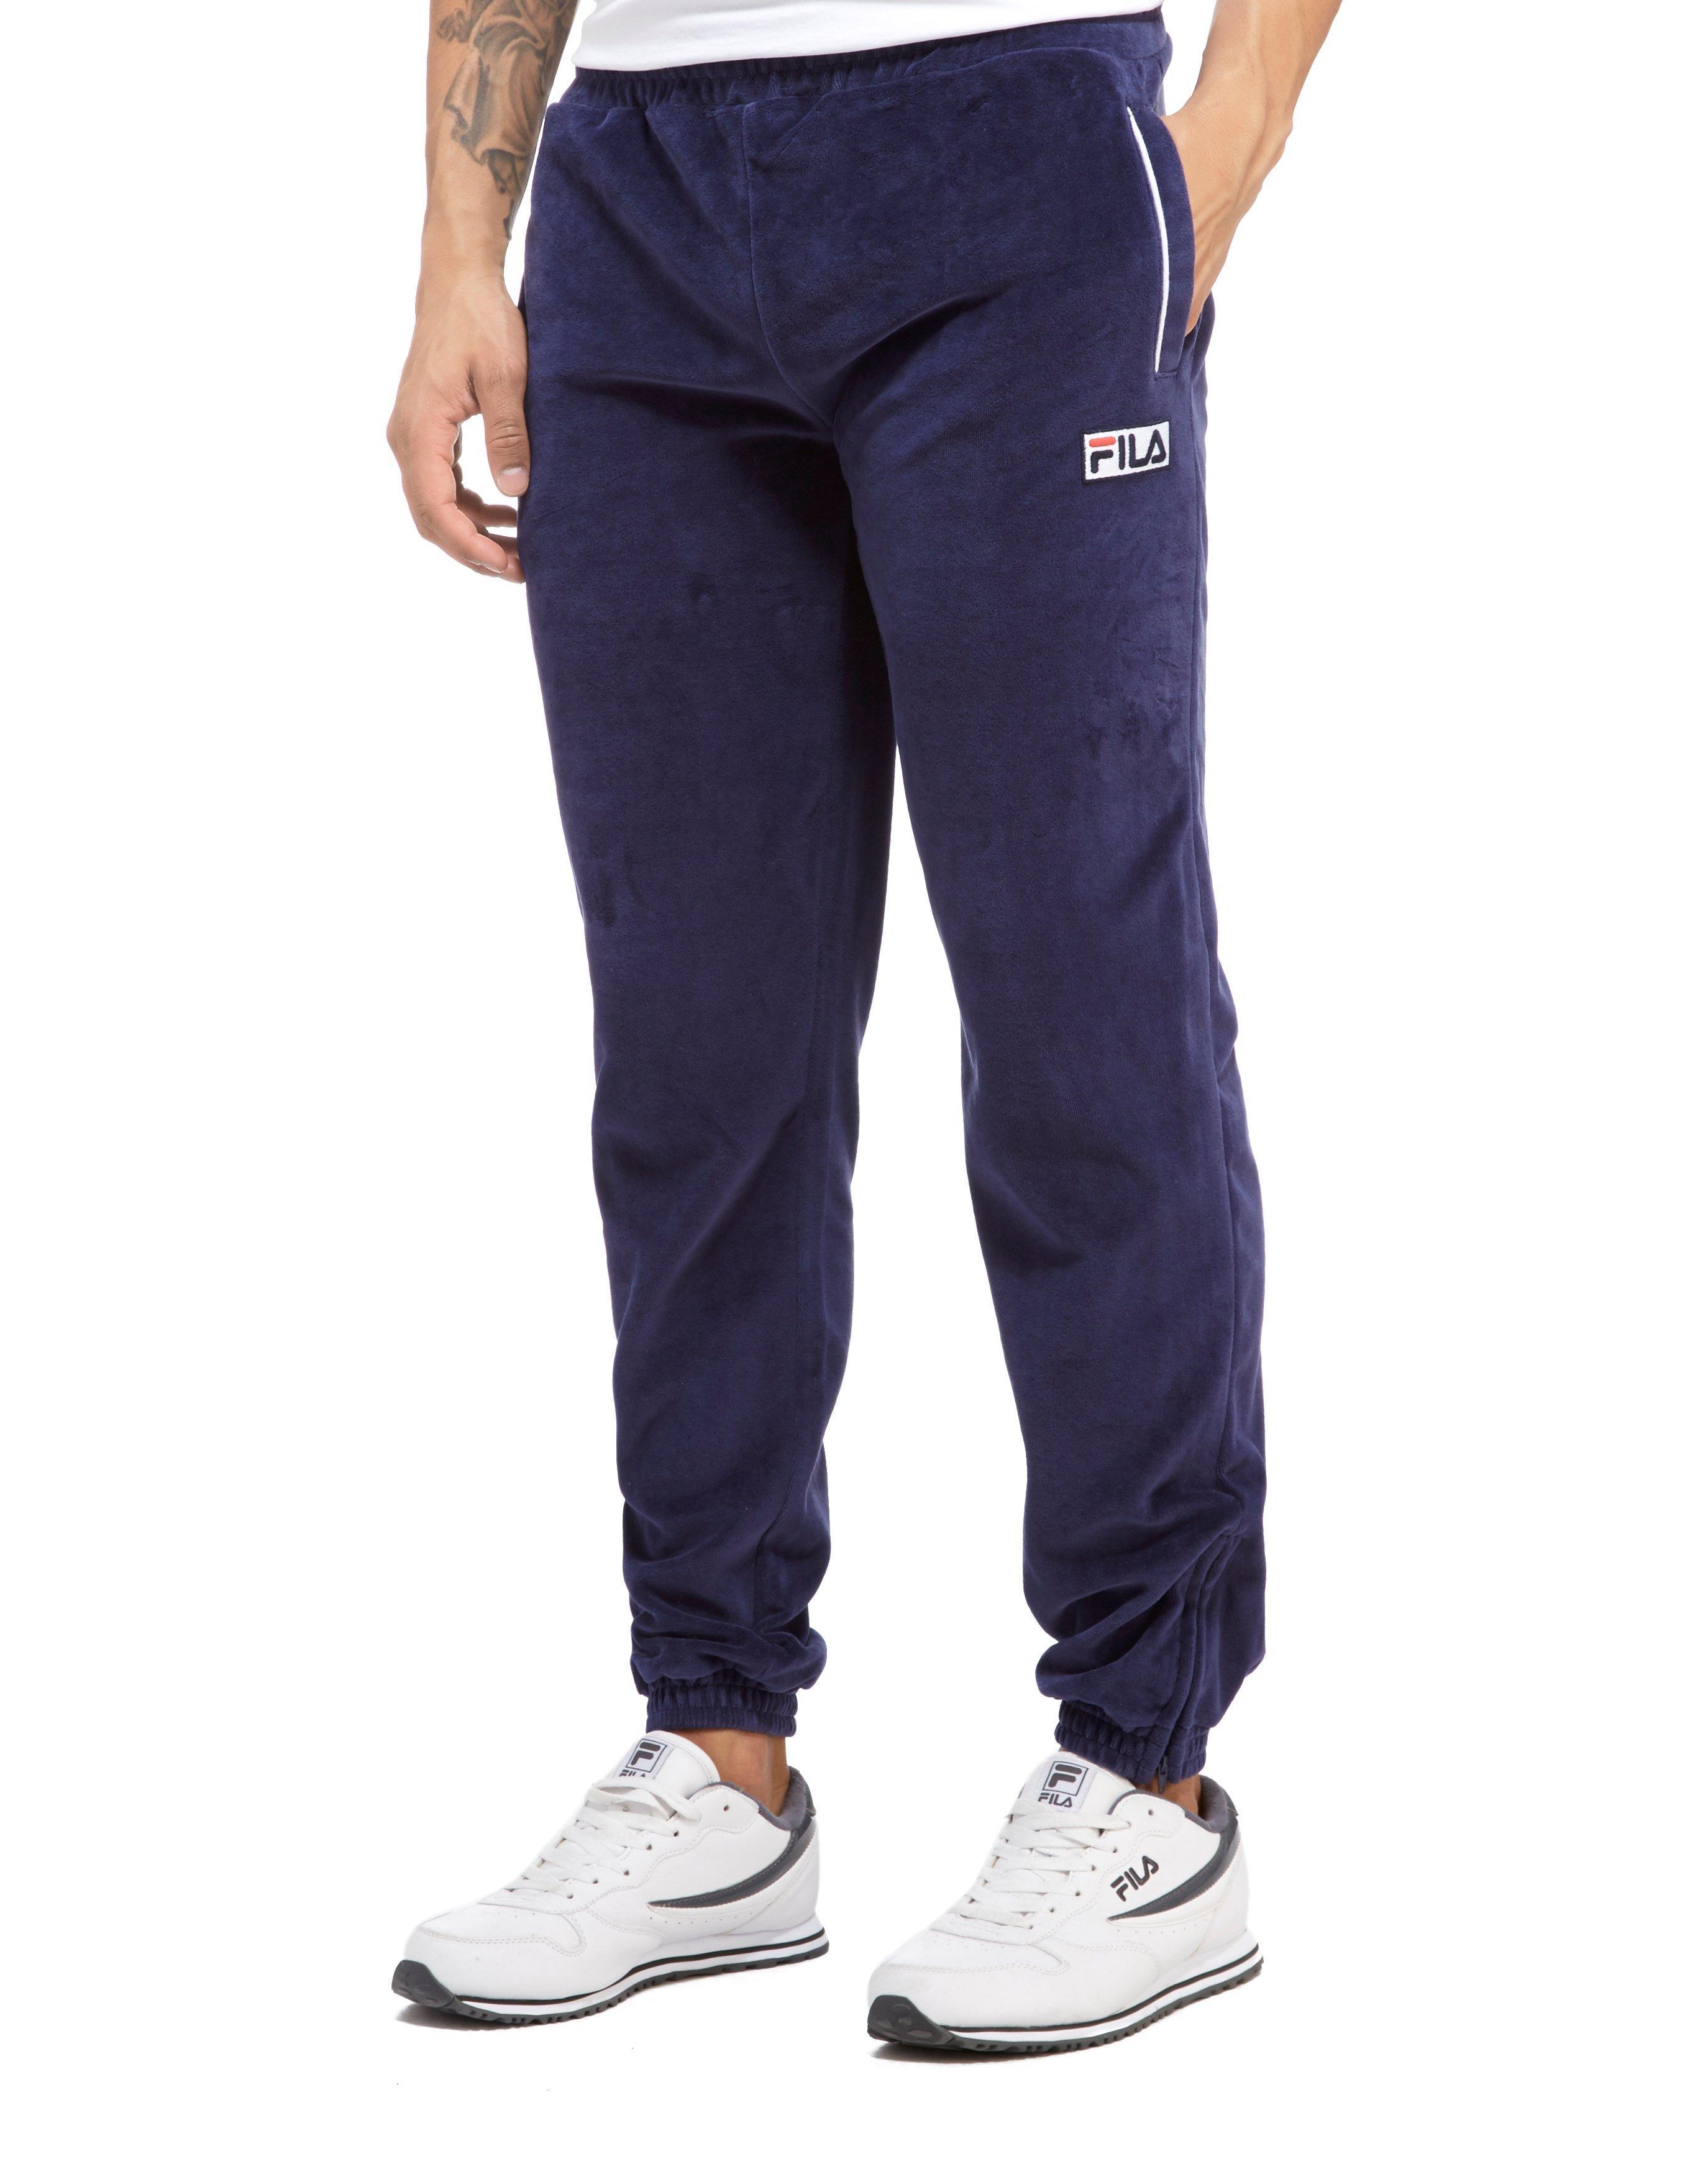 Fila Synthetic Canda Velour Track Pant in Navy (Blue) for Men - Lyst